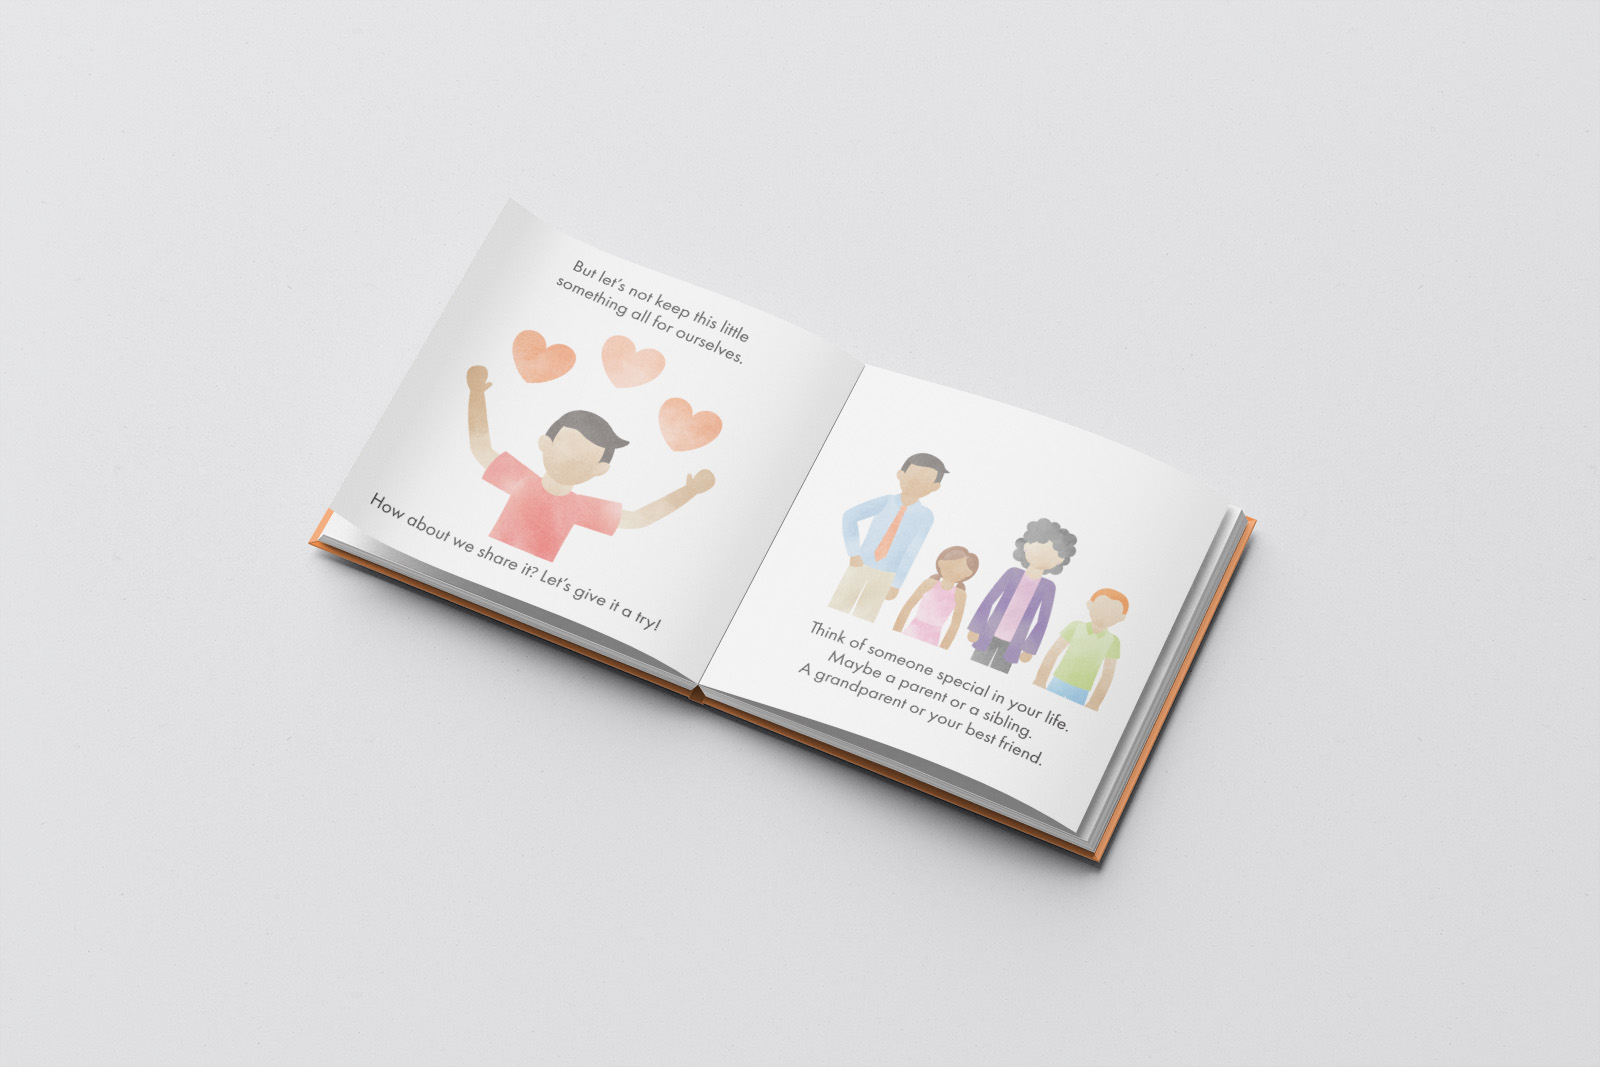 A Big Little Something Illustration and Graphic Design Book Illustrations